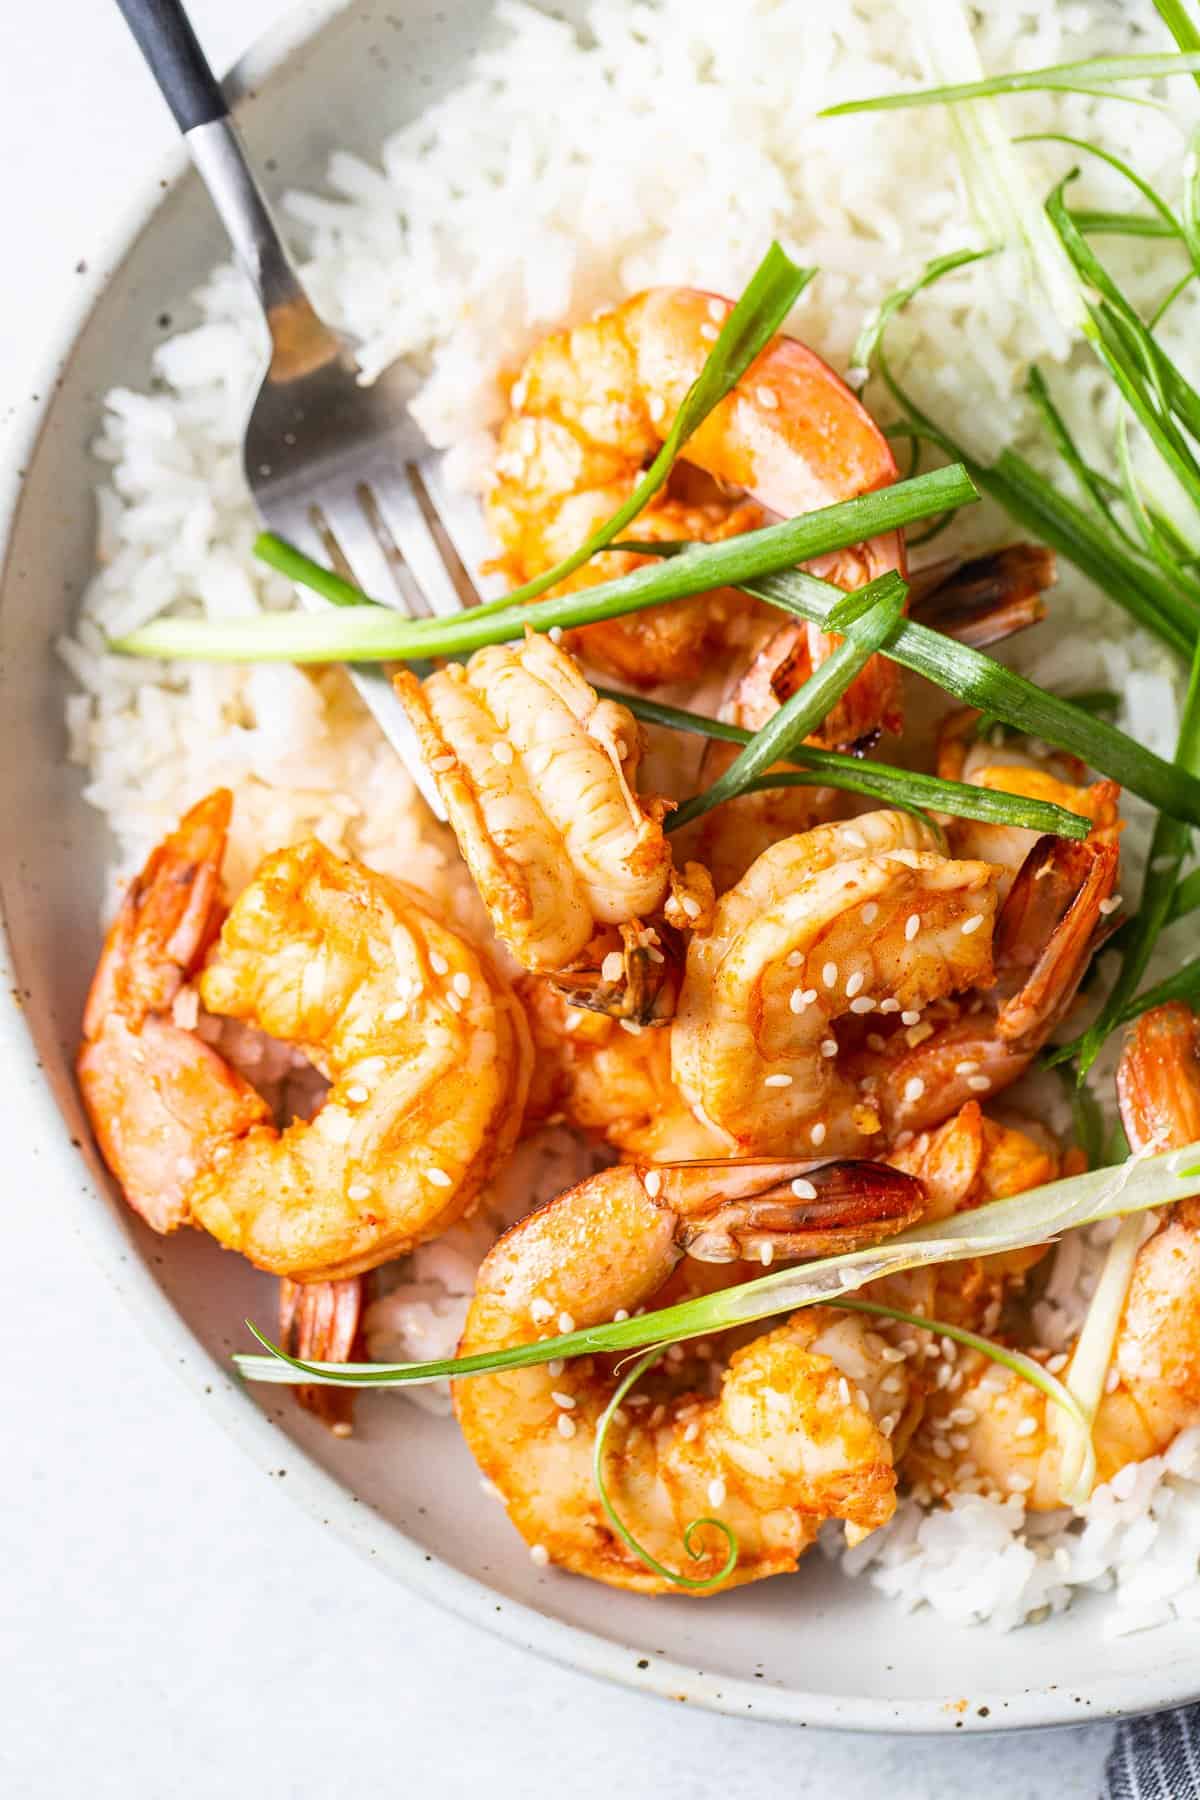 Spicy garlic shrimp in a bowl with rice.